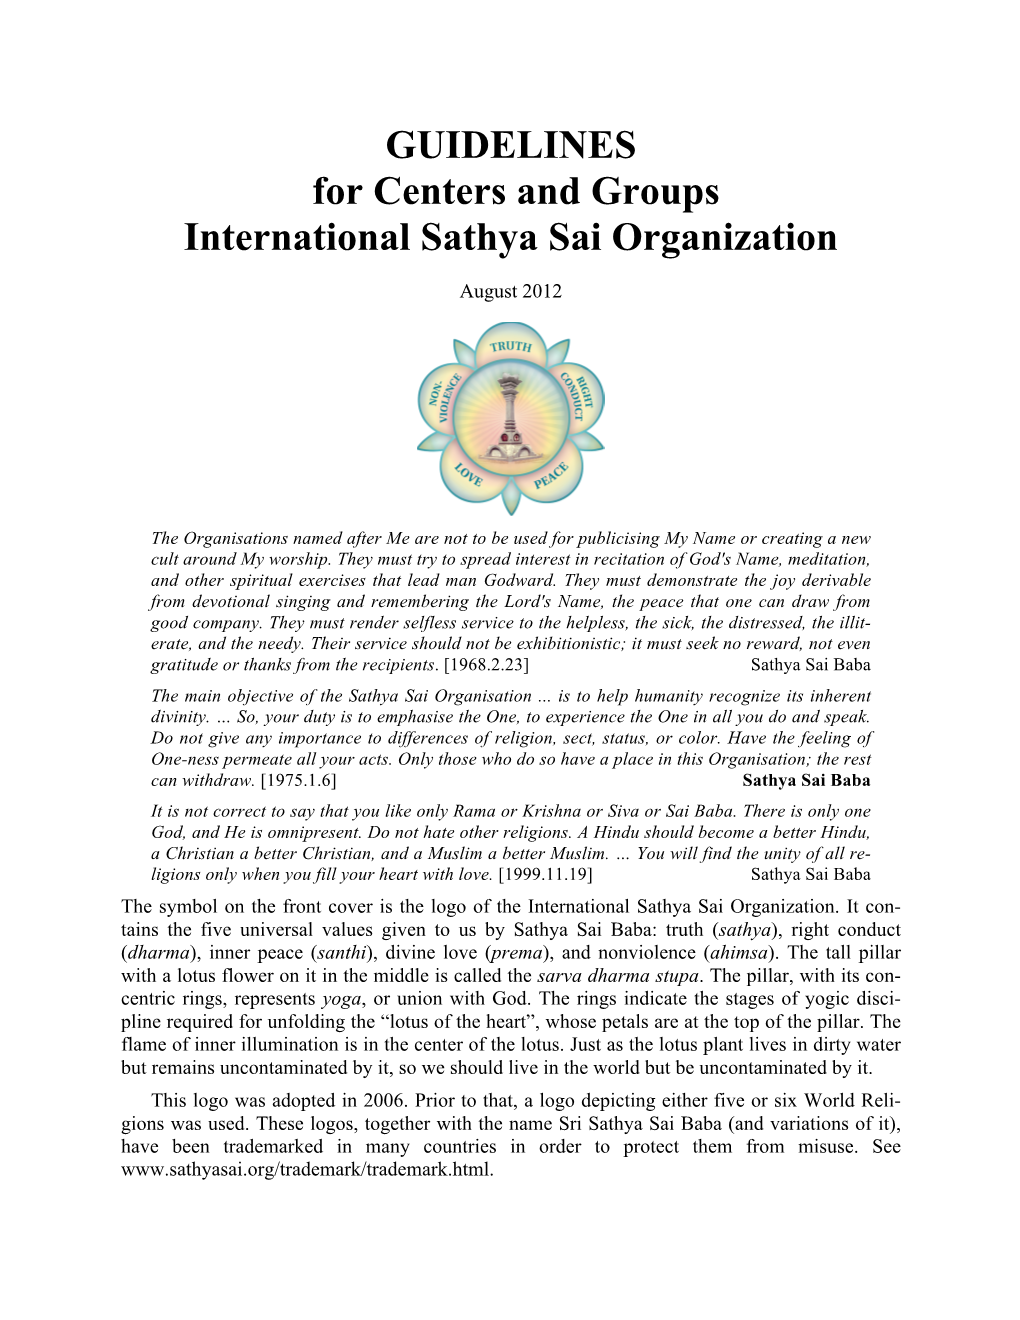 GUIDELINES for Centers and Groups International Sathya Sai Organization